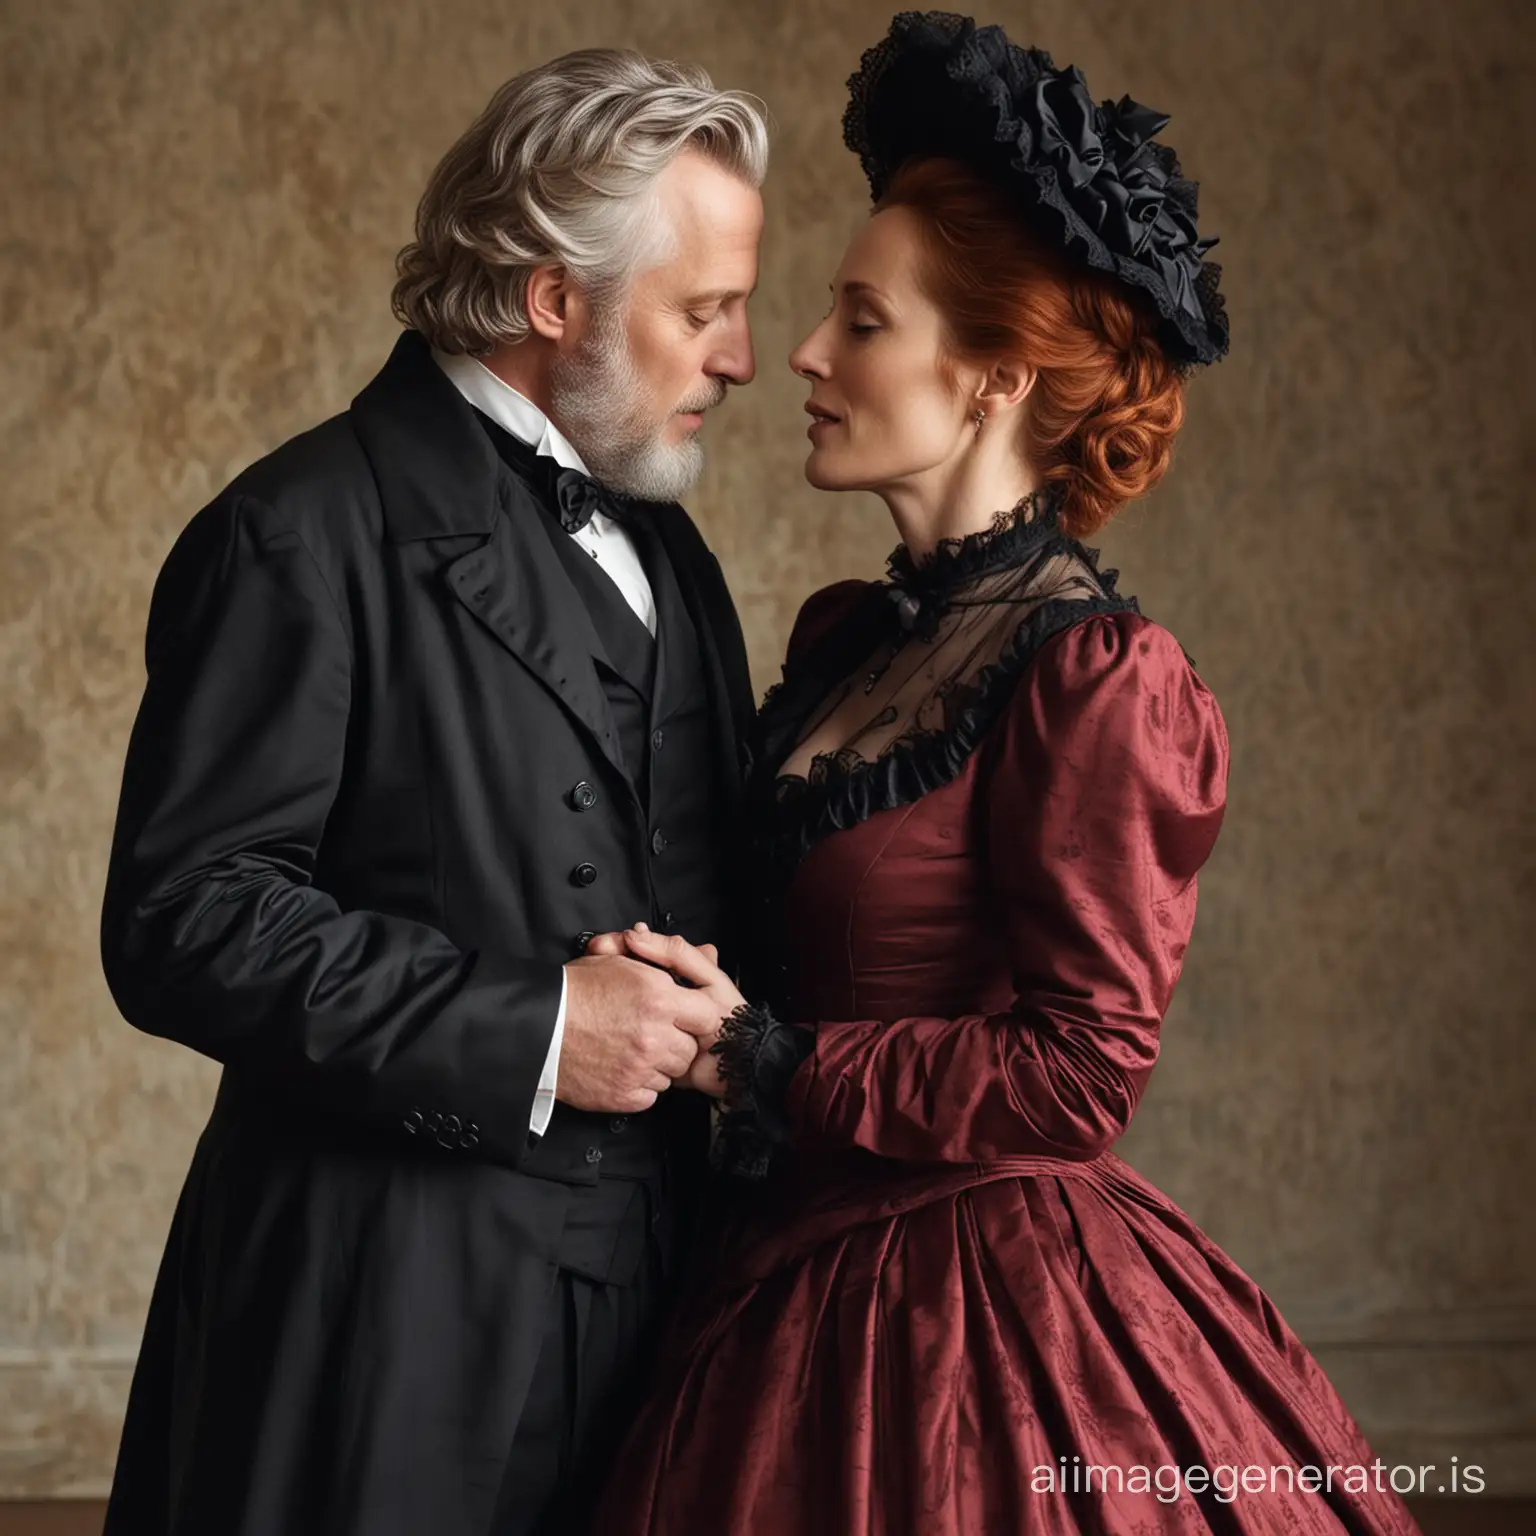 fat red hair Gillian Anderson wearing a dark crimson floor-length loose billowing 1860 victorian crinoline high collared dress with a frilly bonnet kissing an old dressed man dressed into a black victorian suit who seems to be her newlywed husband
